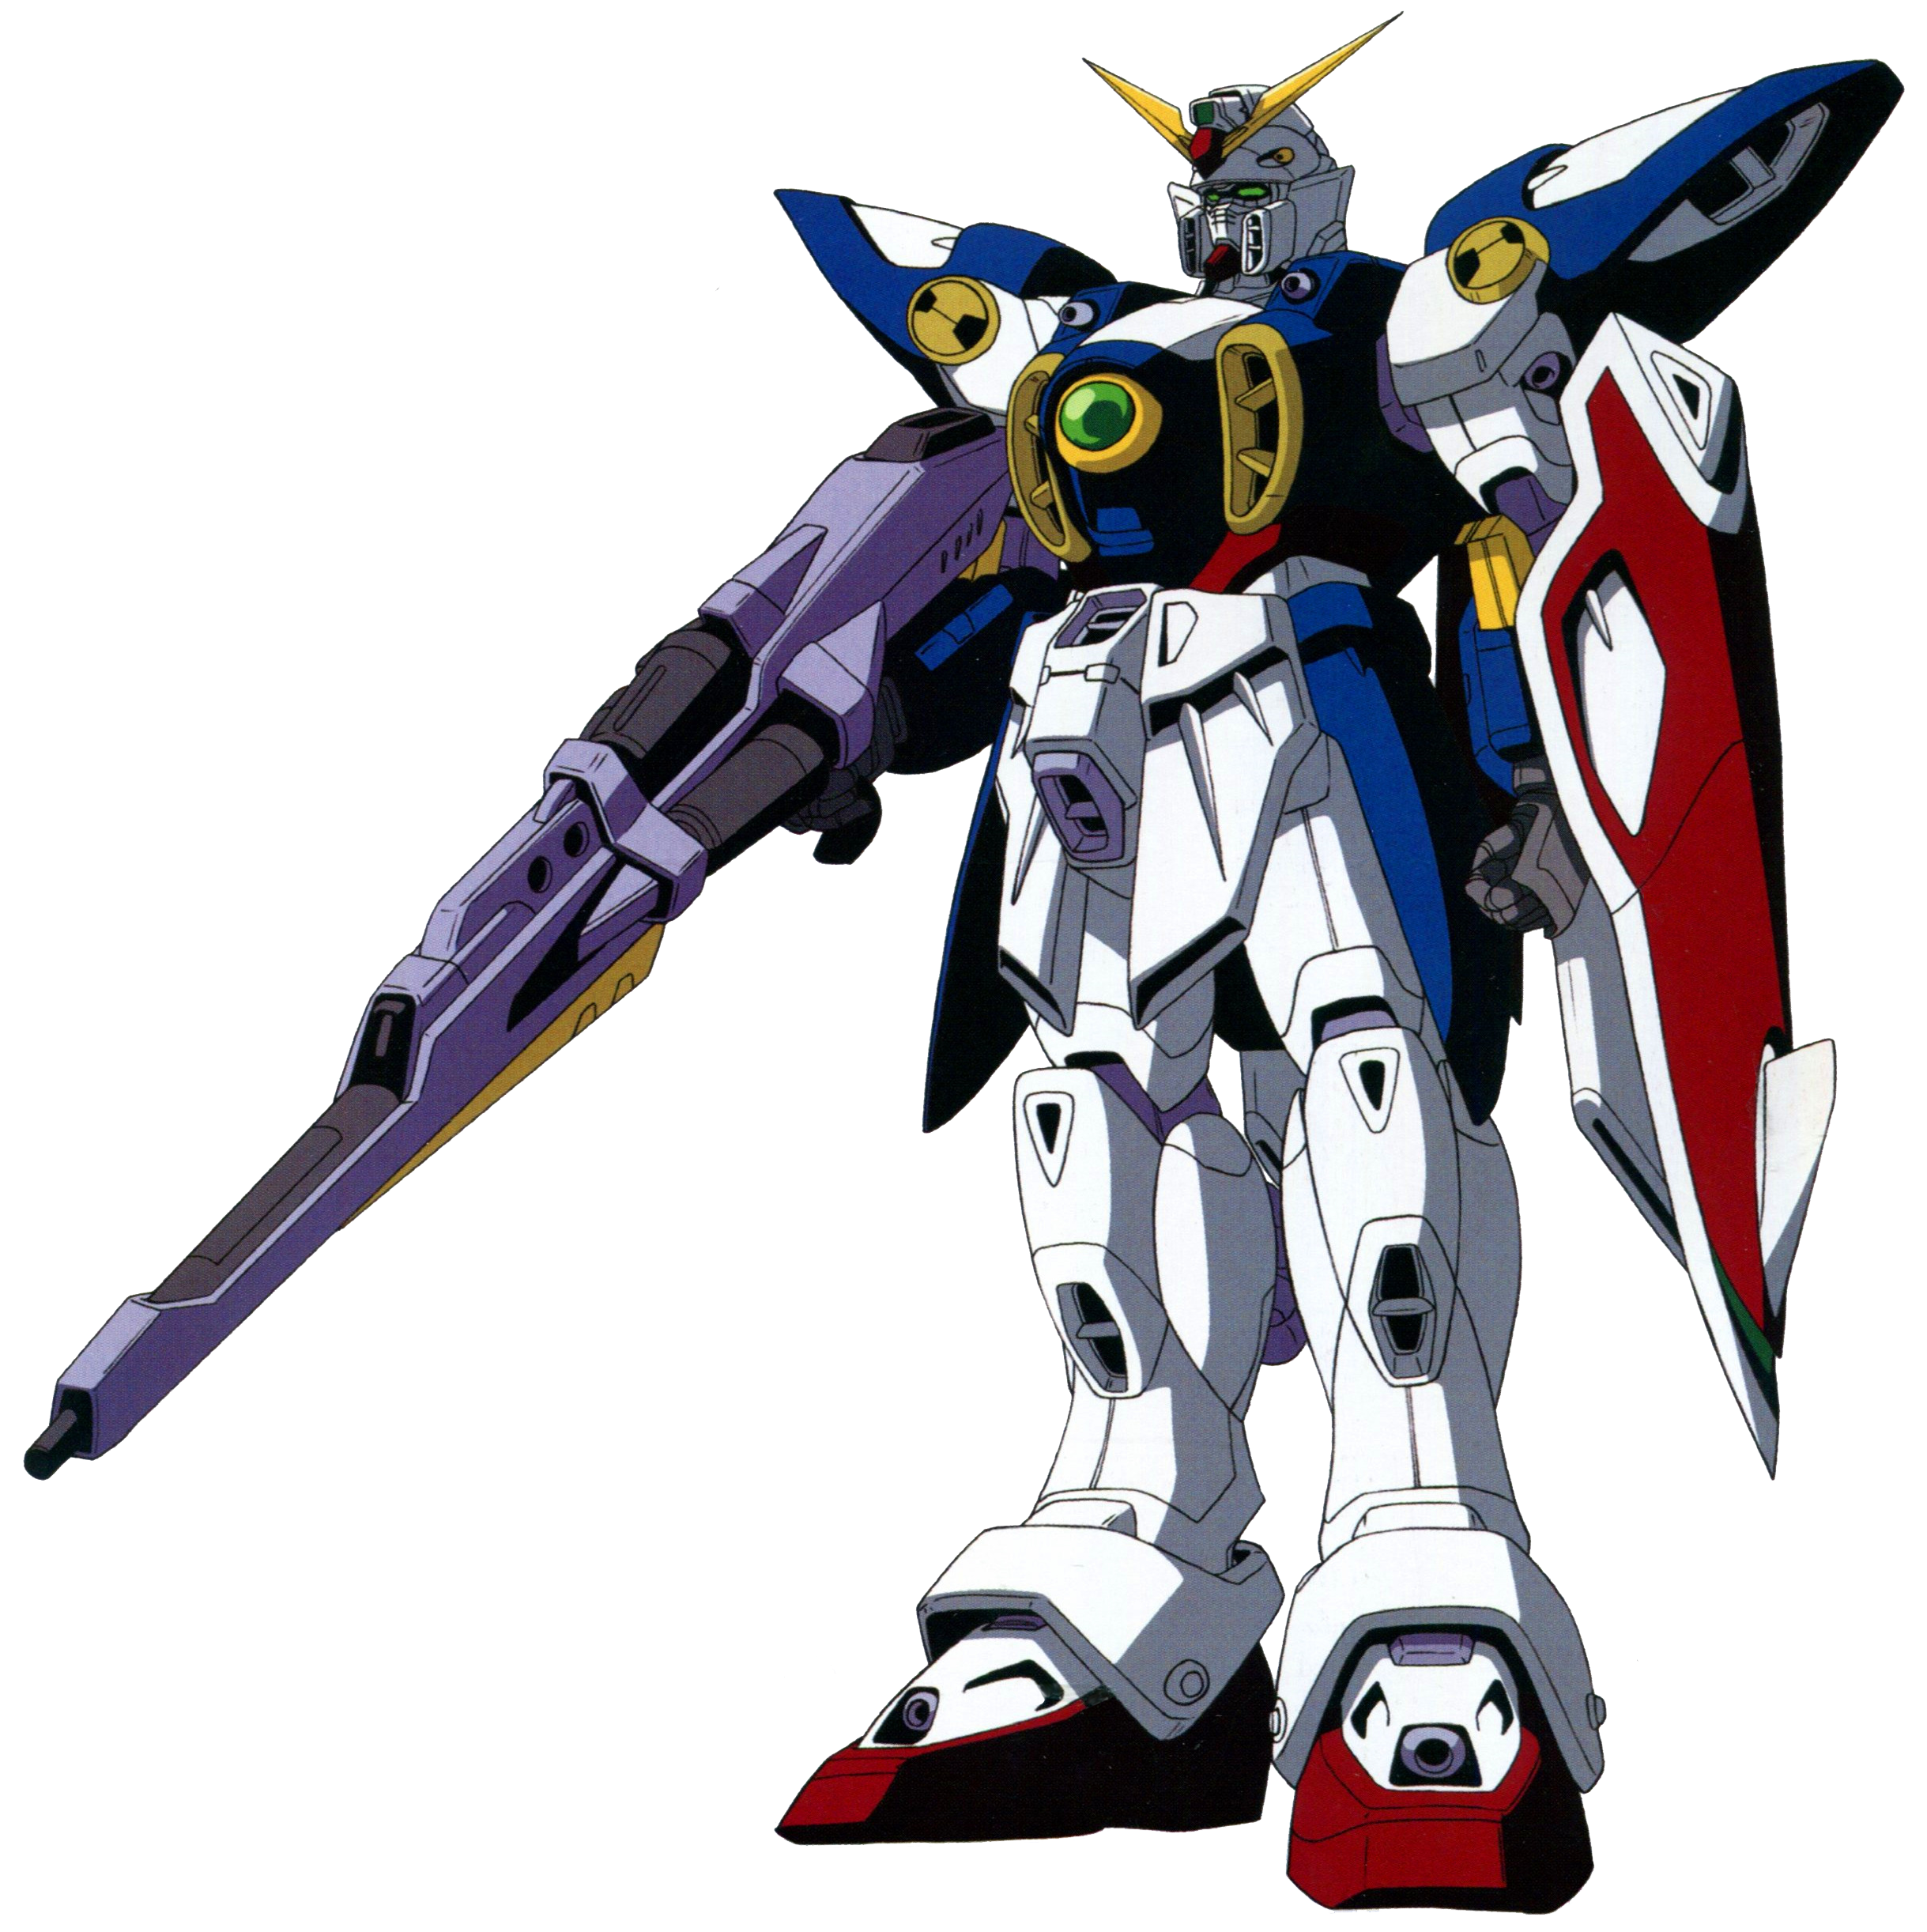 1017800 anime Earth Mobile Suit Gundam Wing computer wallpaper font   Rare Gallery HD Wallpapers